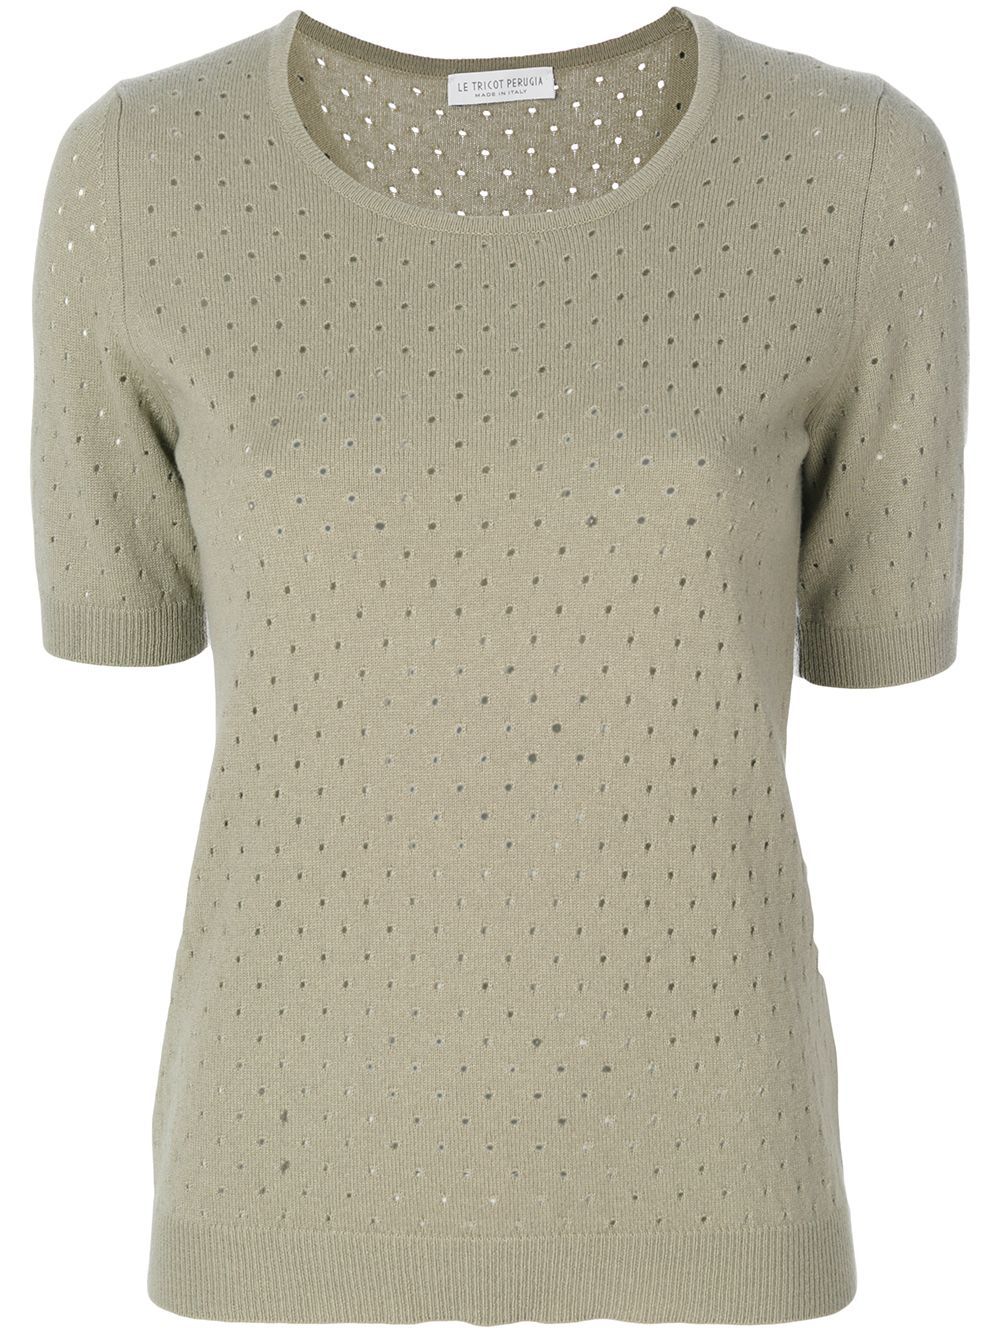 Le Tricot Perugia punch hole knit top - Green | FarFetch Global